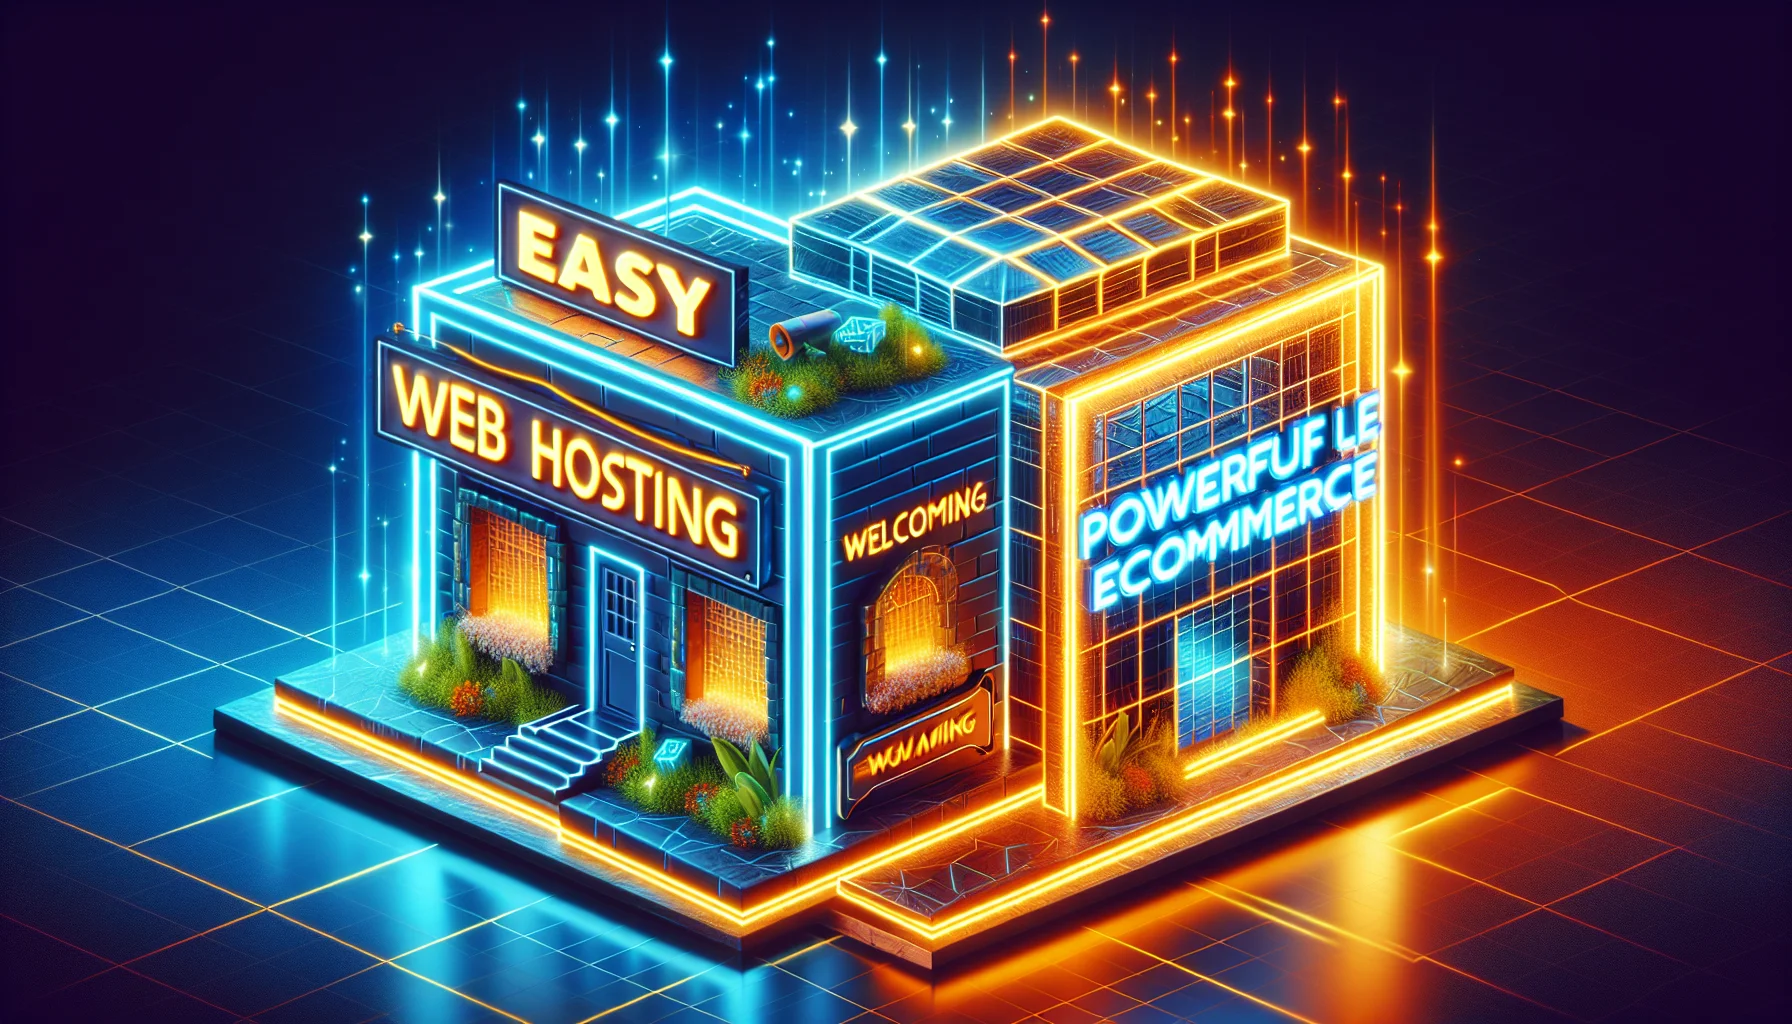 Generate a humorous and enticing image representing a friendly competition between two abstract entities. One side represents easy web hosting, shown as a large, cozy cube with glowing edges and a welcoming sign on the door. The other side symbolizes powerful eCommerce solutions, portrayed as a modern, slick square skyscraper that glows with neon lights, with the words 'Power of eCommerce' scrolling along its perimeter. They are set in a vibrant digital landscape.